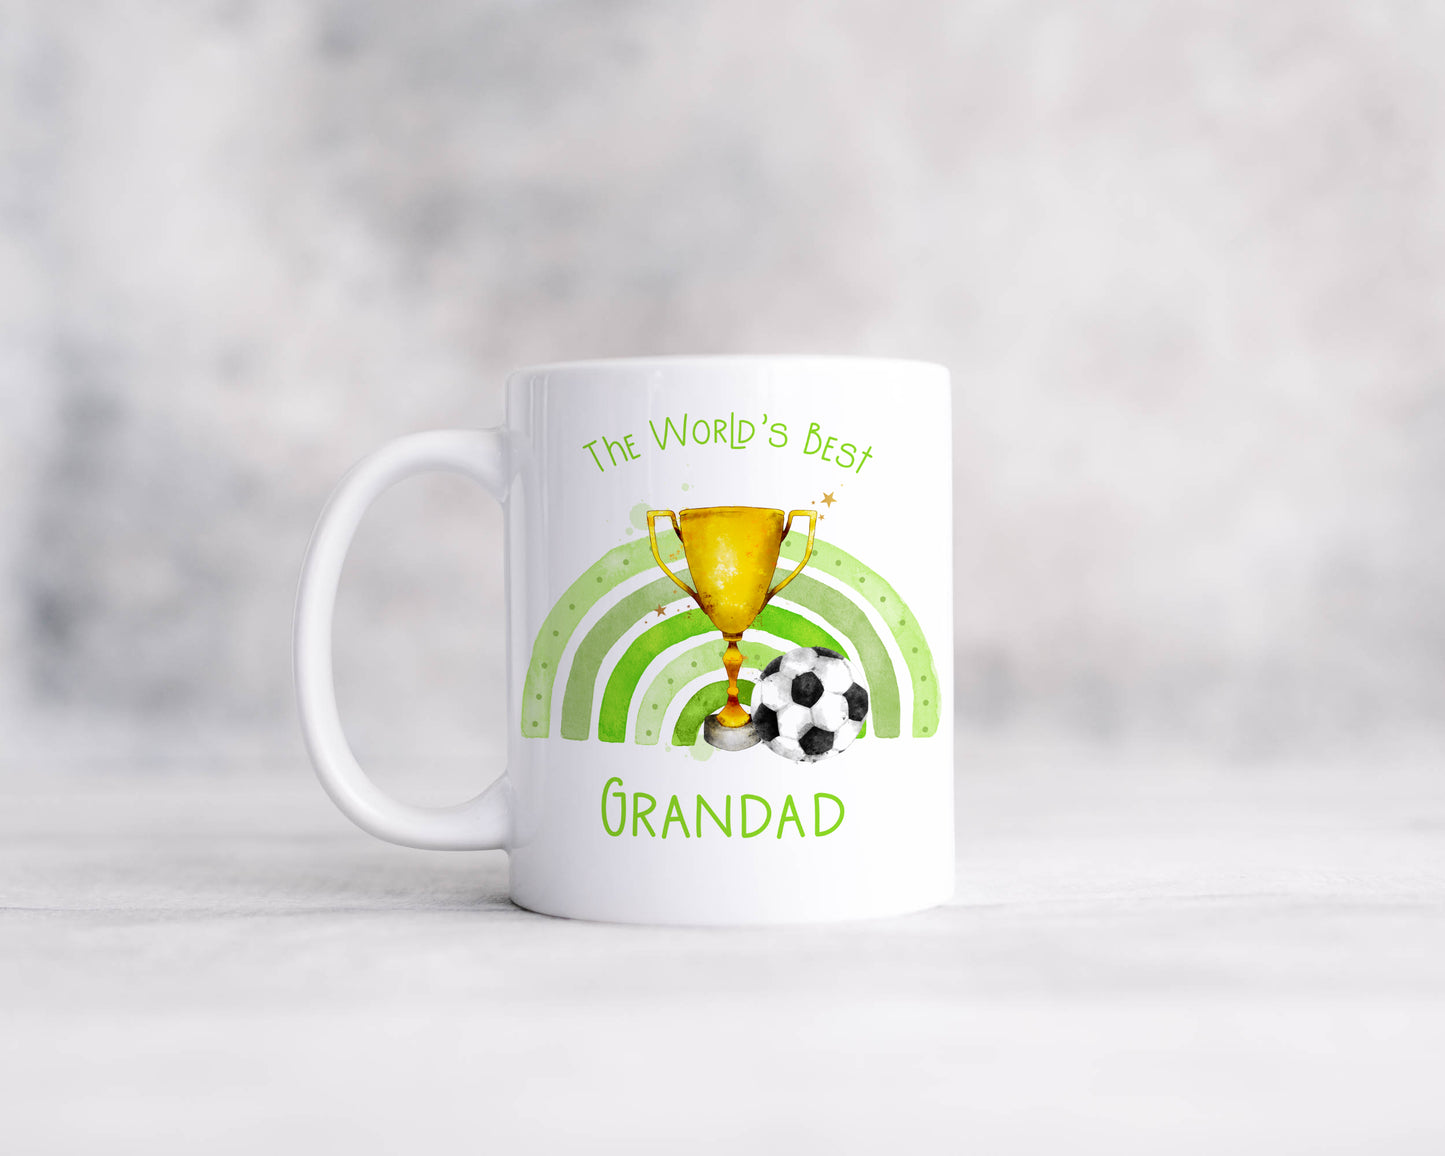 Ceramic mug featuring a trophy, football and green rainbow. The text reads 'The World's best' and can be personalised